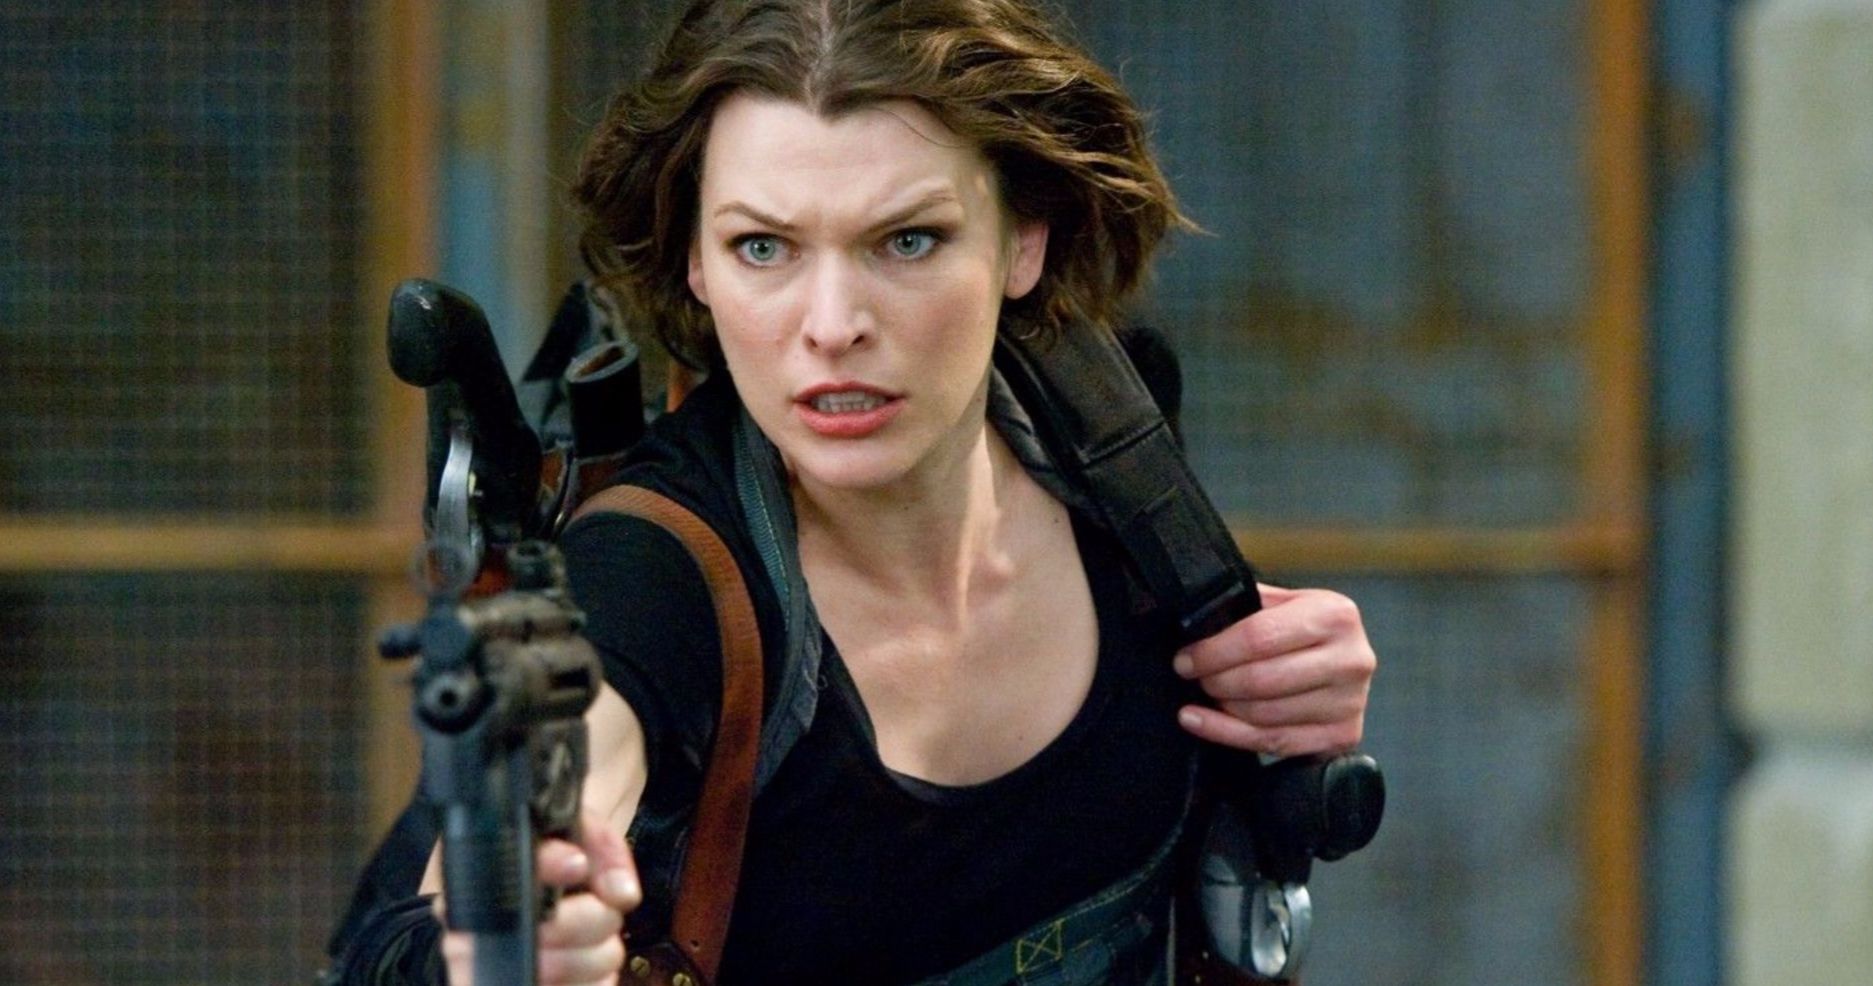 Resident Evil Director Explains Why He Created Alice for the Movies